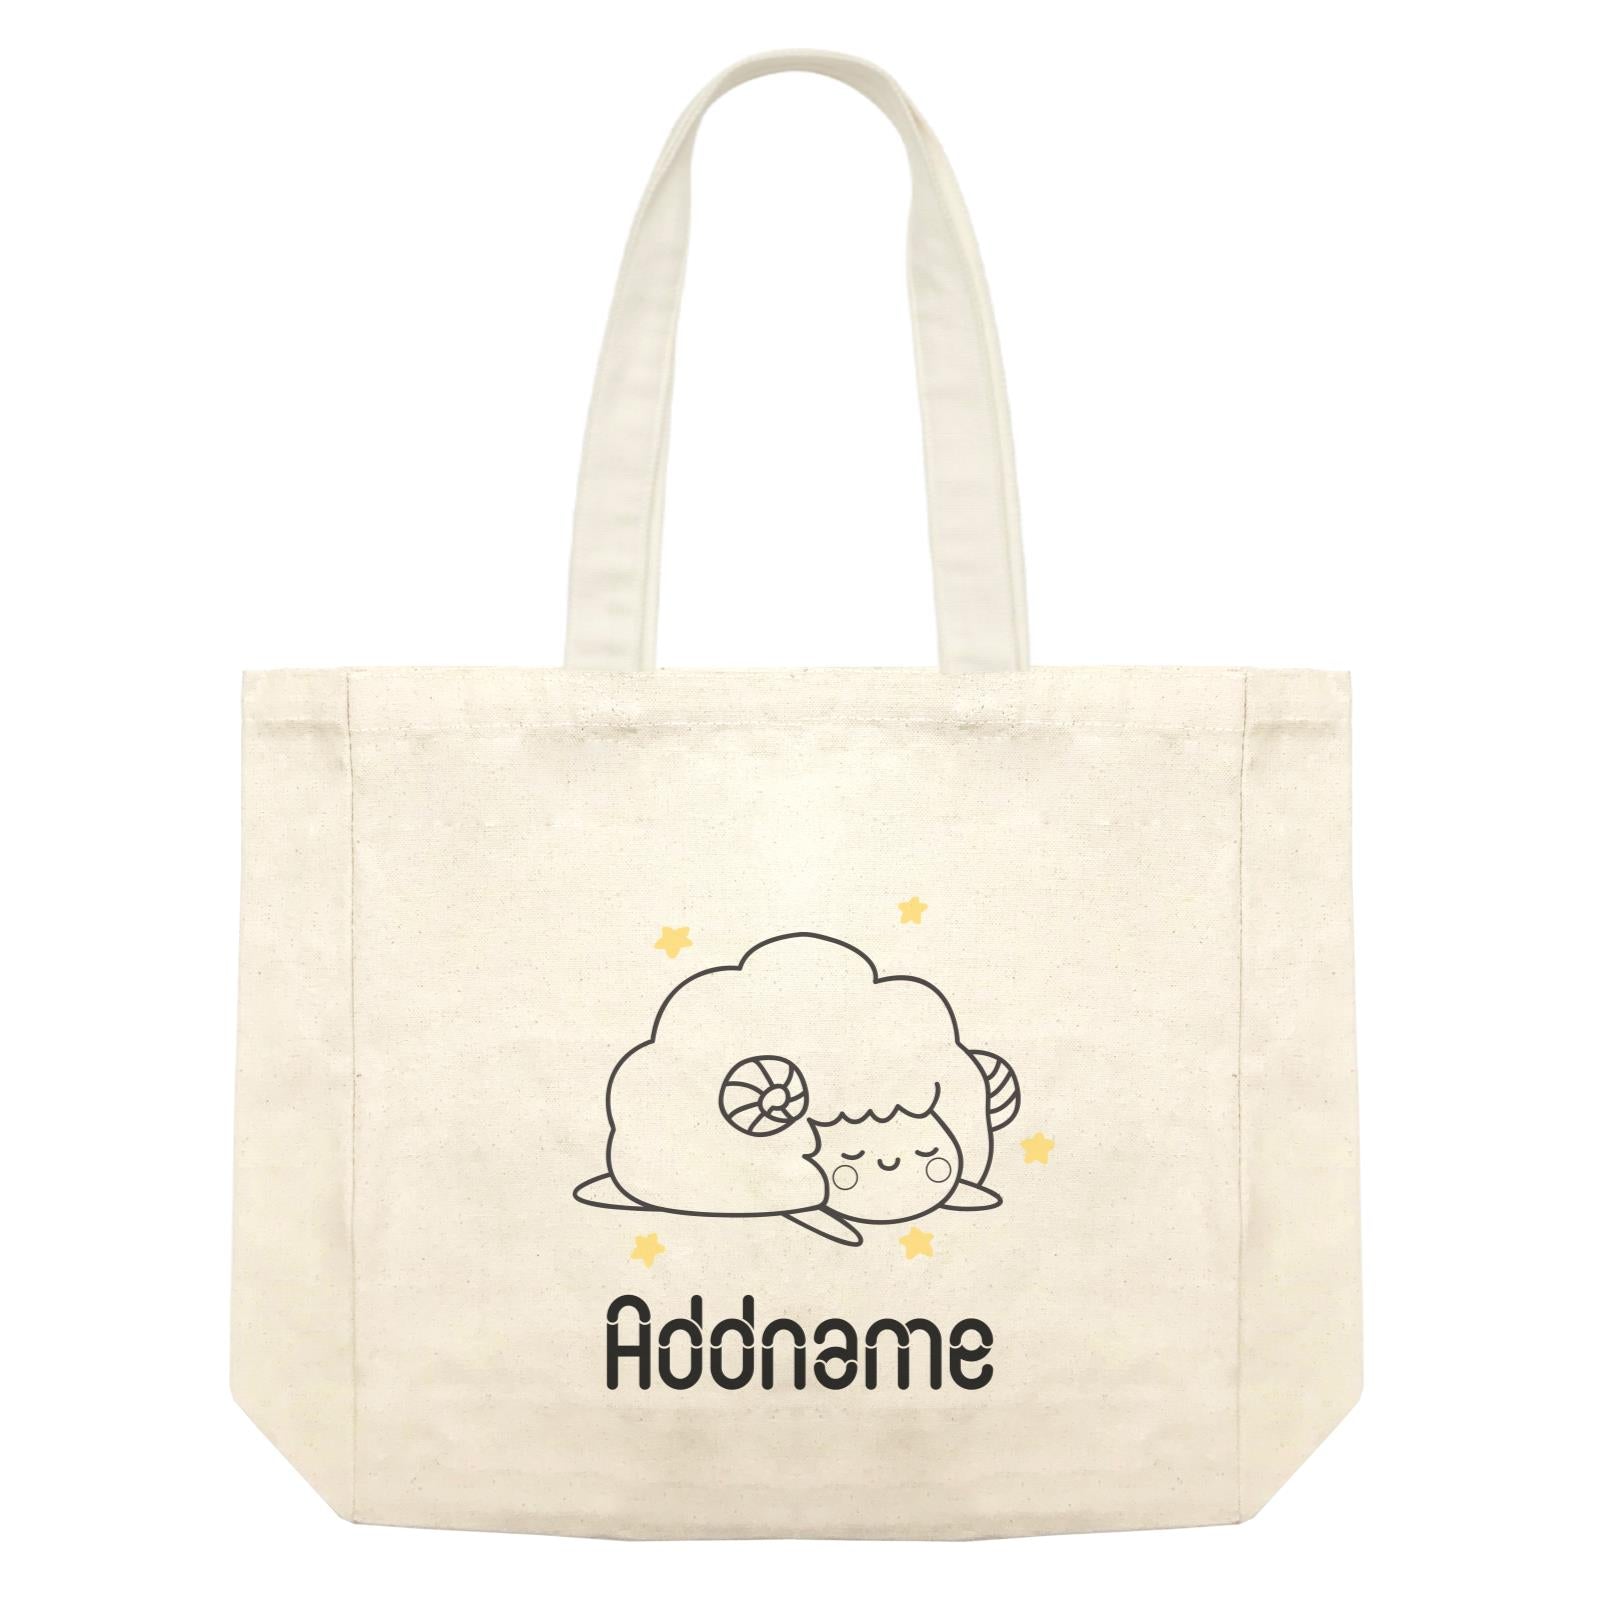 Coloring Outline Cute Hand Drawn Animals Farm Sheep Addname Shopping Bag